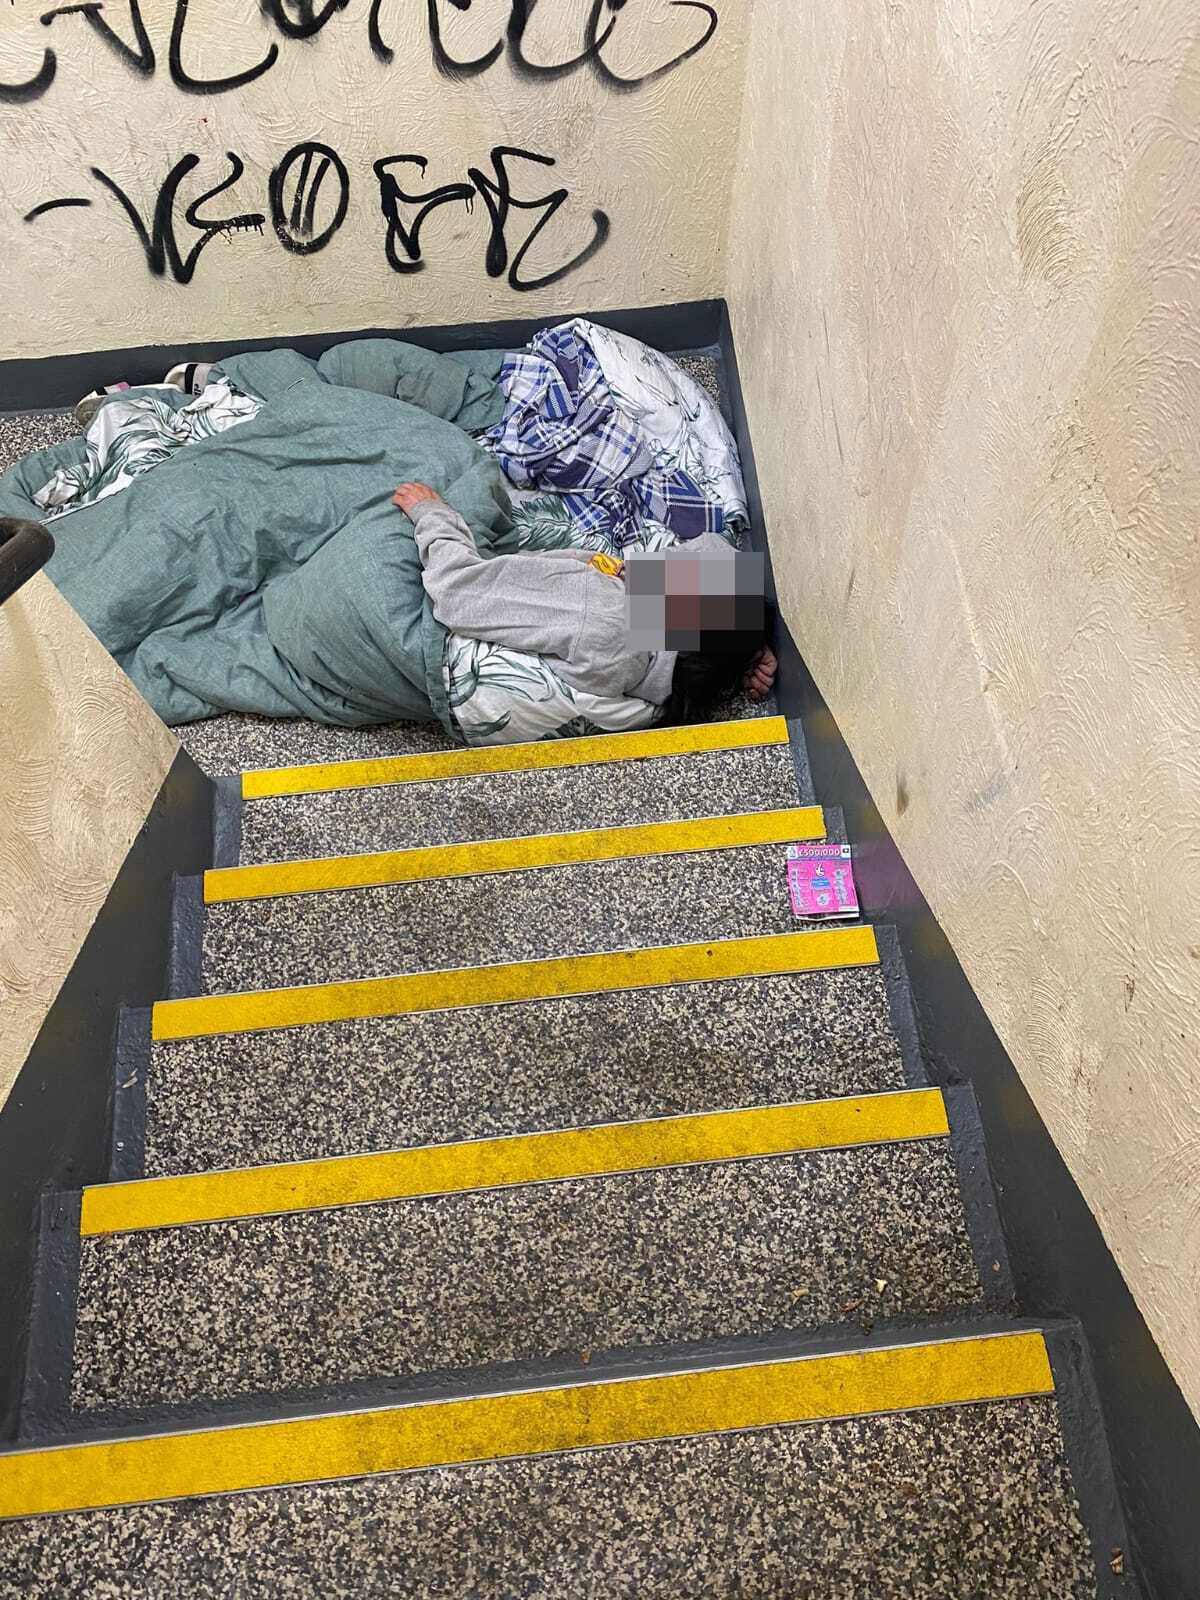 A person sleeping in the stairwell of Milford Towers